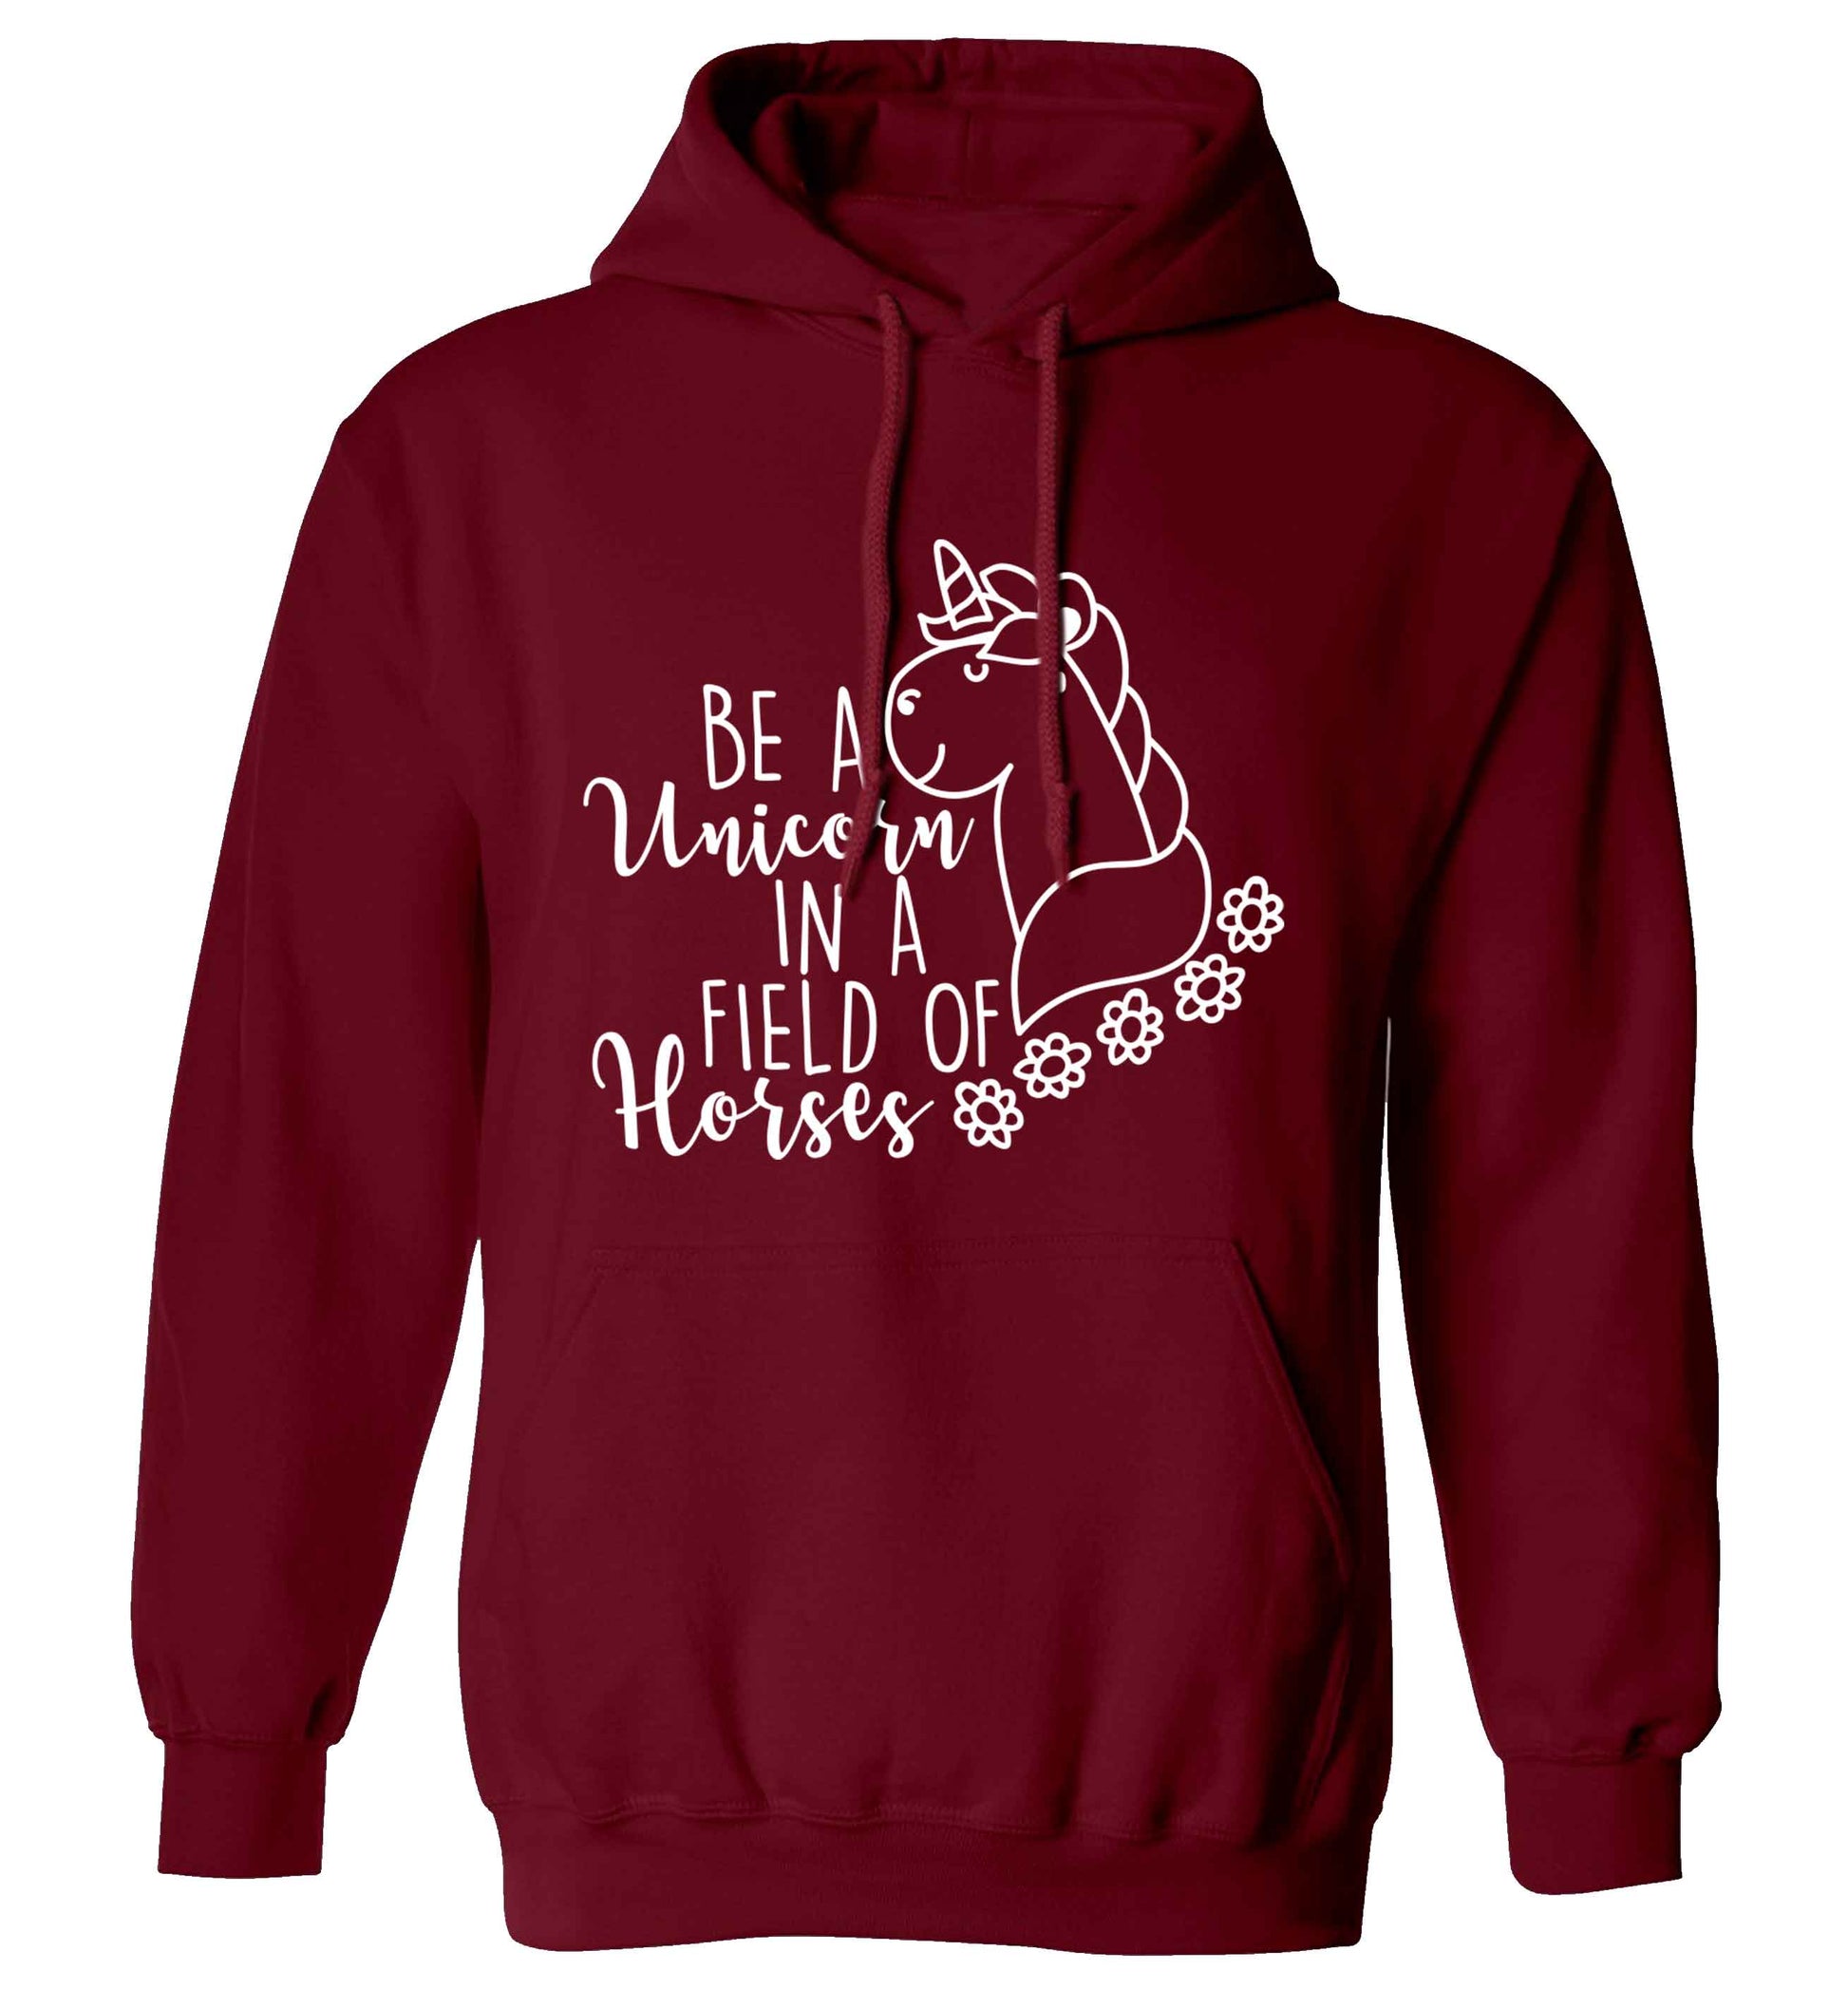 Be a unicorn in a field of horses adults unisex maroon hoodie 2XL